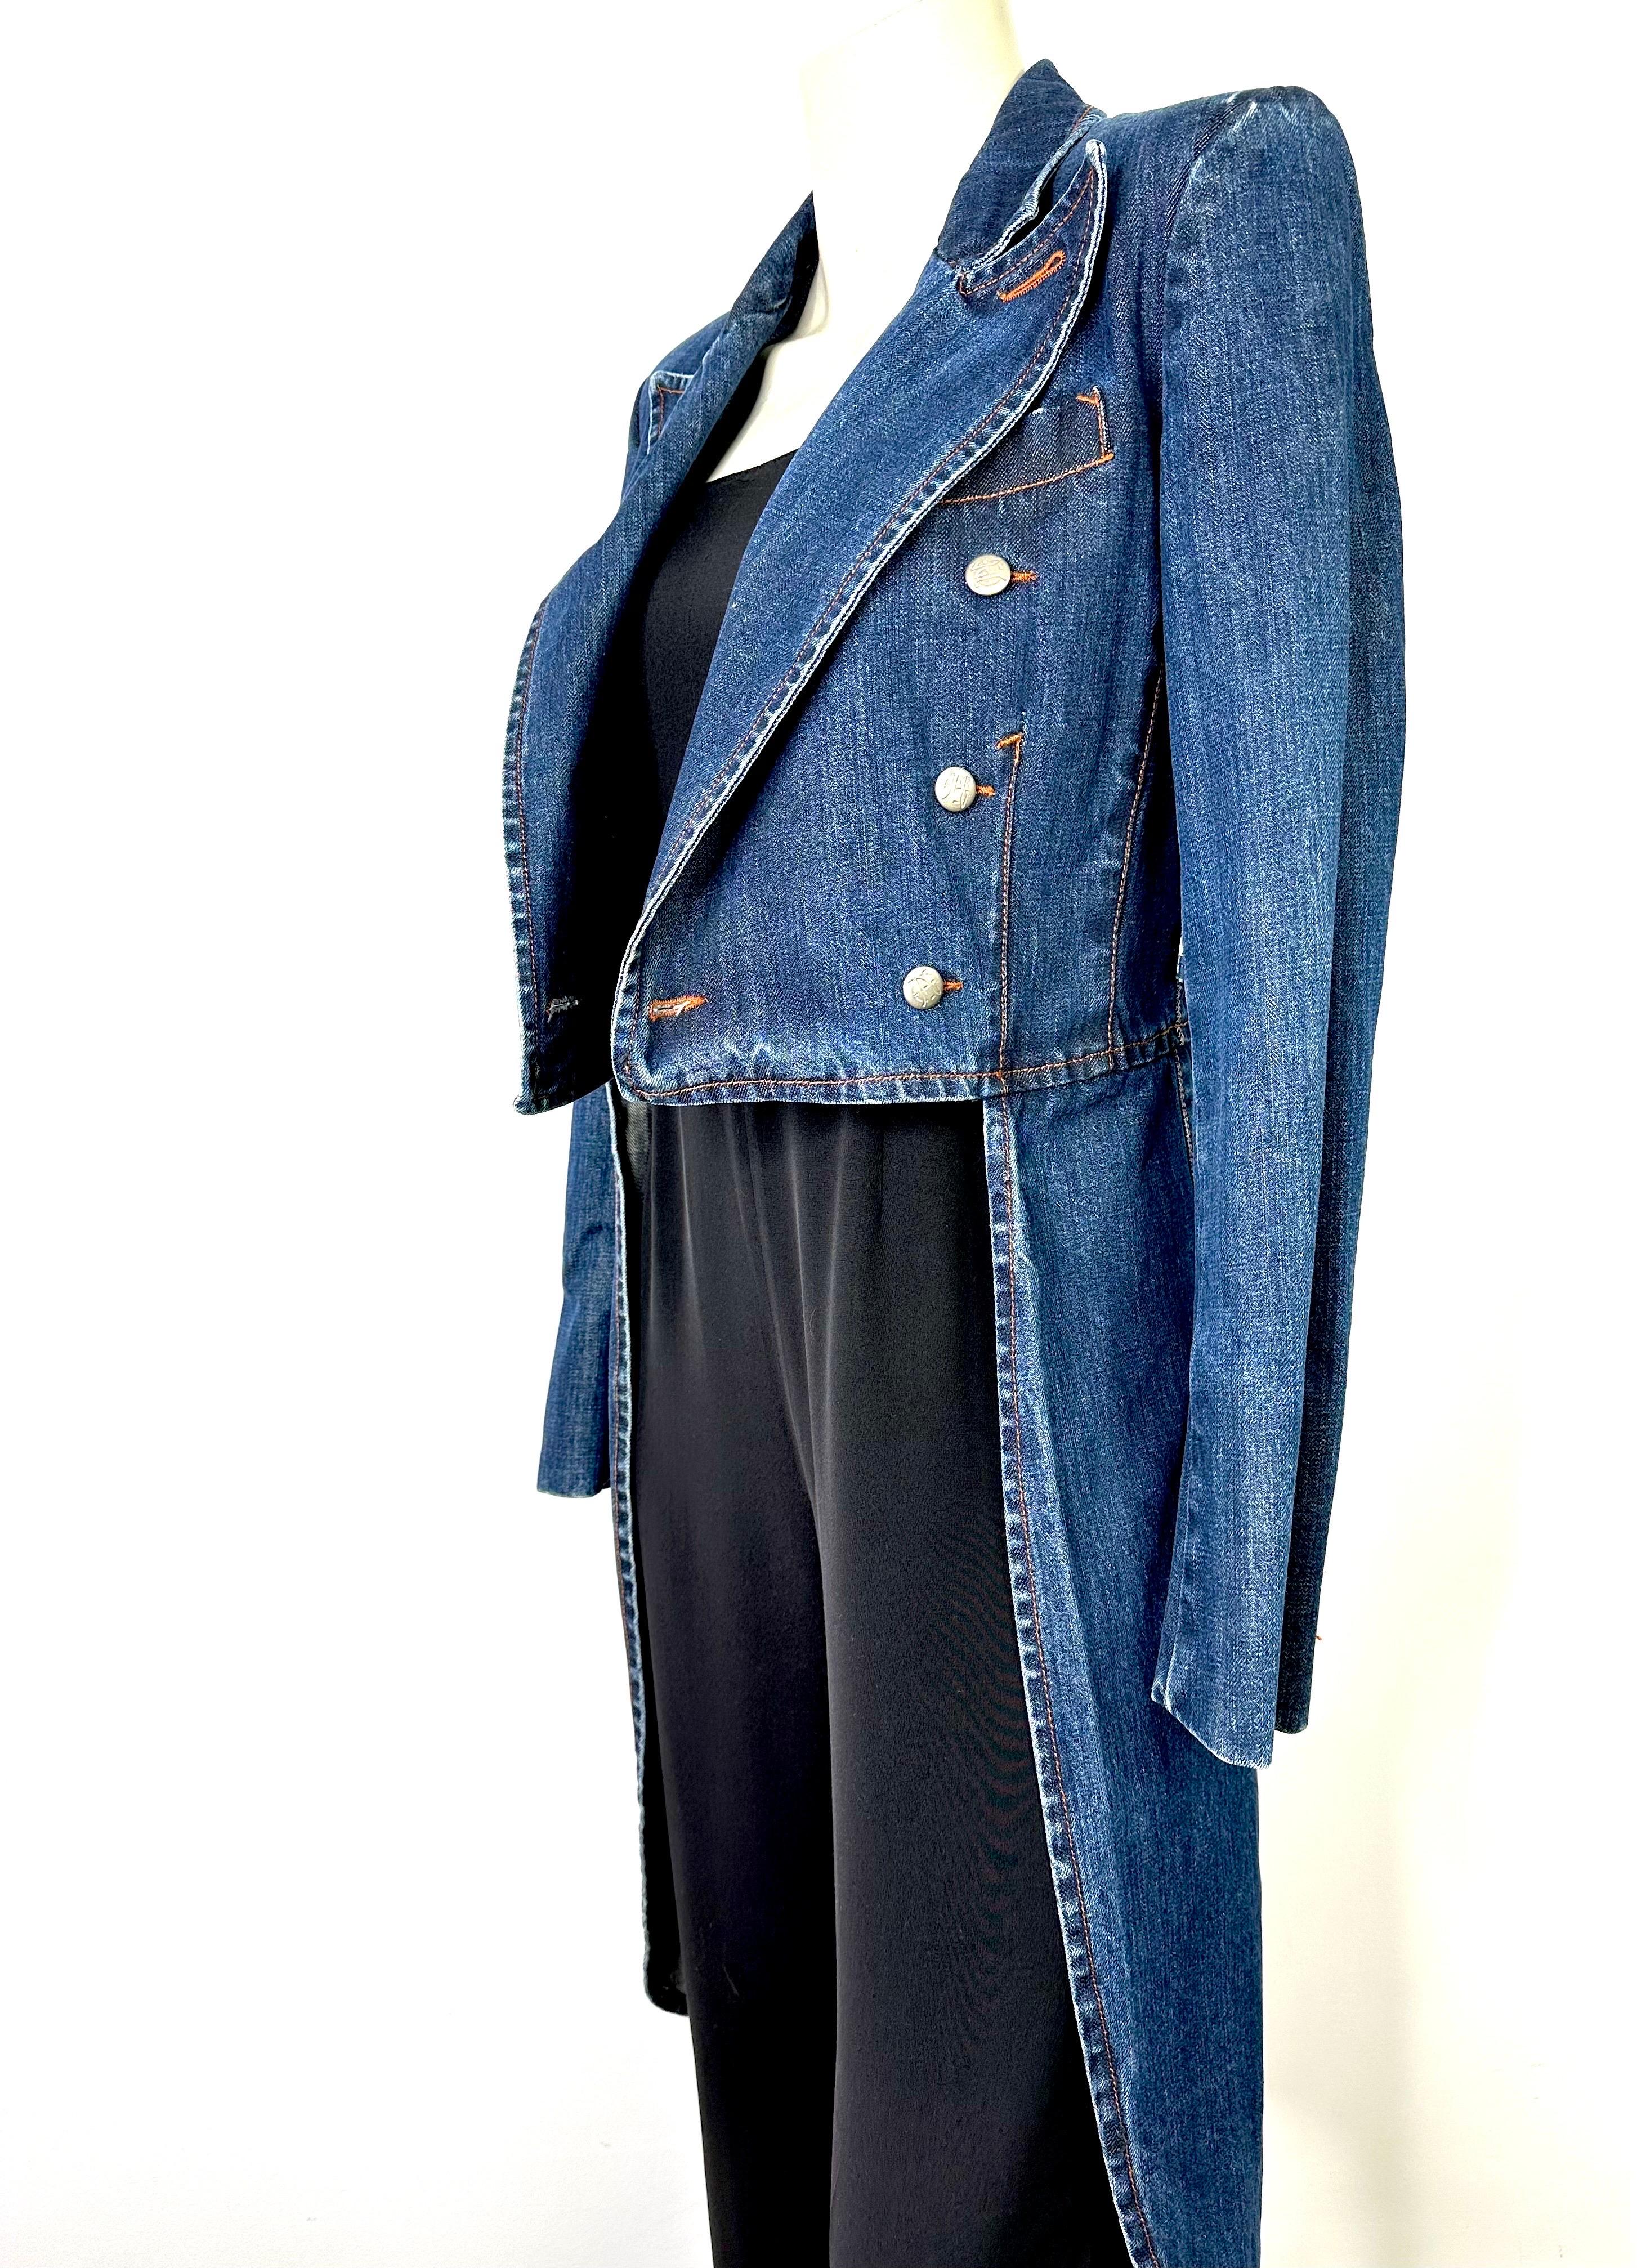 Jean Paul Gaultier vintage jeans tails jacket In Good Condition For Sale In L'ESCALA, ES